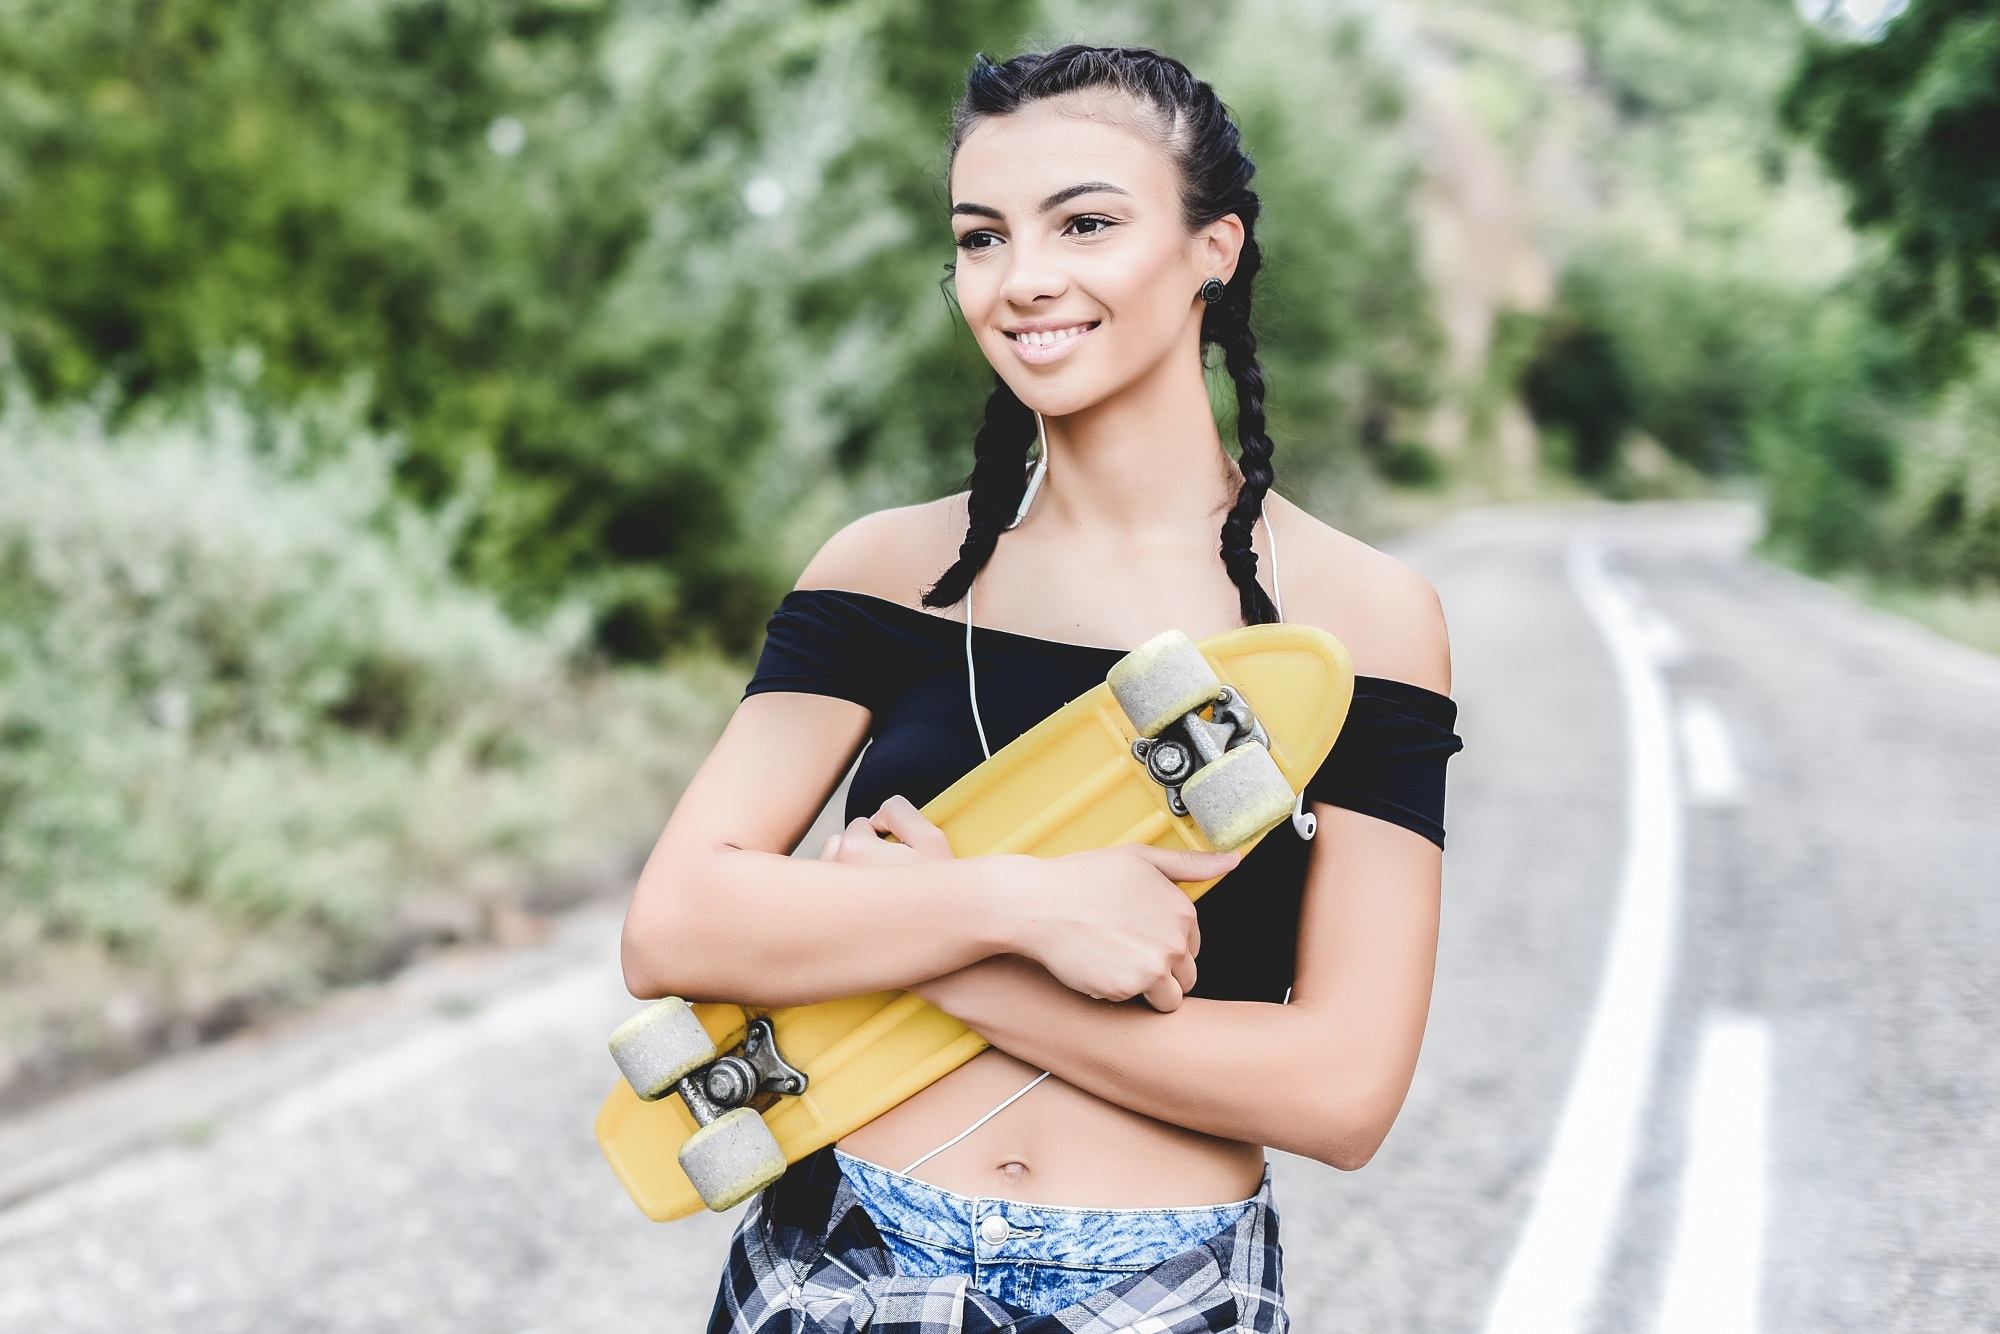 Hairstyles for skaters: Woman with black hair in boxer braid holding a skateboard